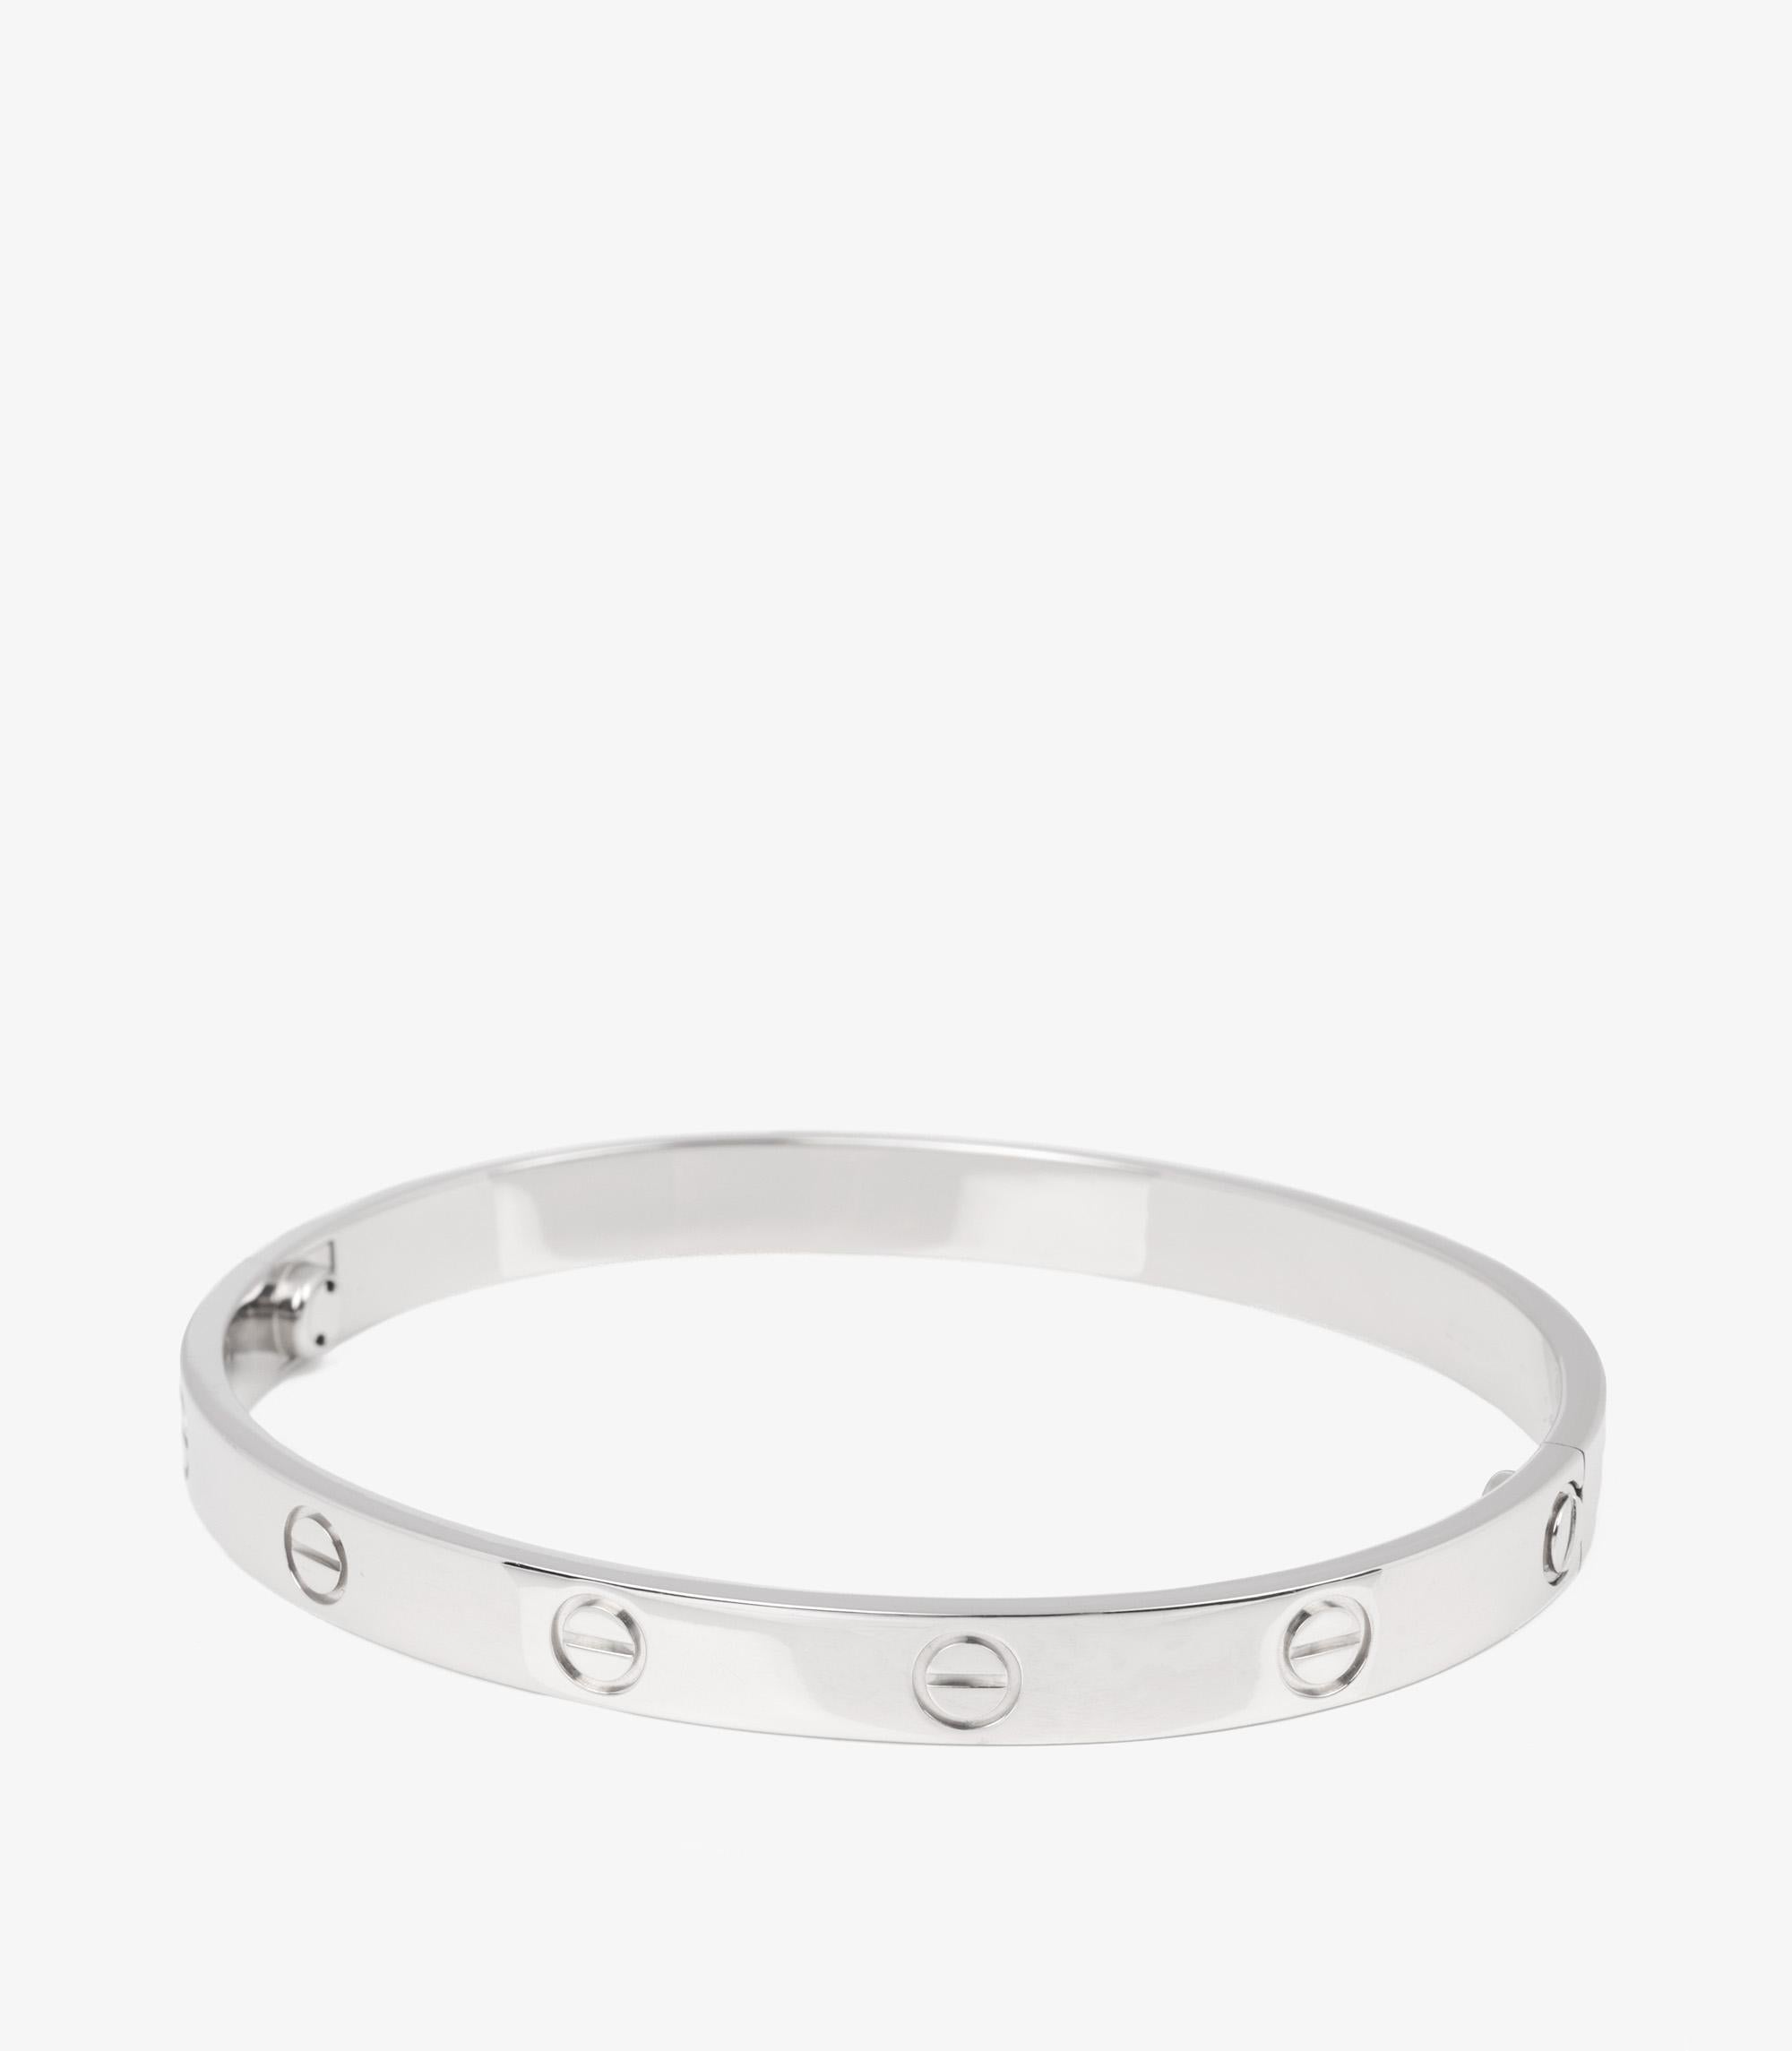 Cartier 18ct White Gold Love Bangle

Brand- Cartier
Model- Love Bangle
Product Type- Bracelet
Serial Number- IH****
Accompanied By- Cartier Pouch, Service Papers, Screwdriver
Material(s)- 18ct White Gold

Bracelet Length- 18cm
Bracelet Width-